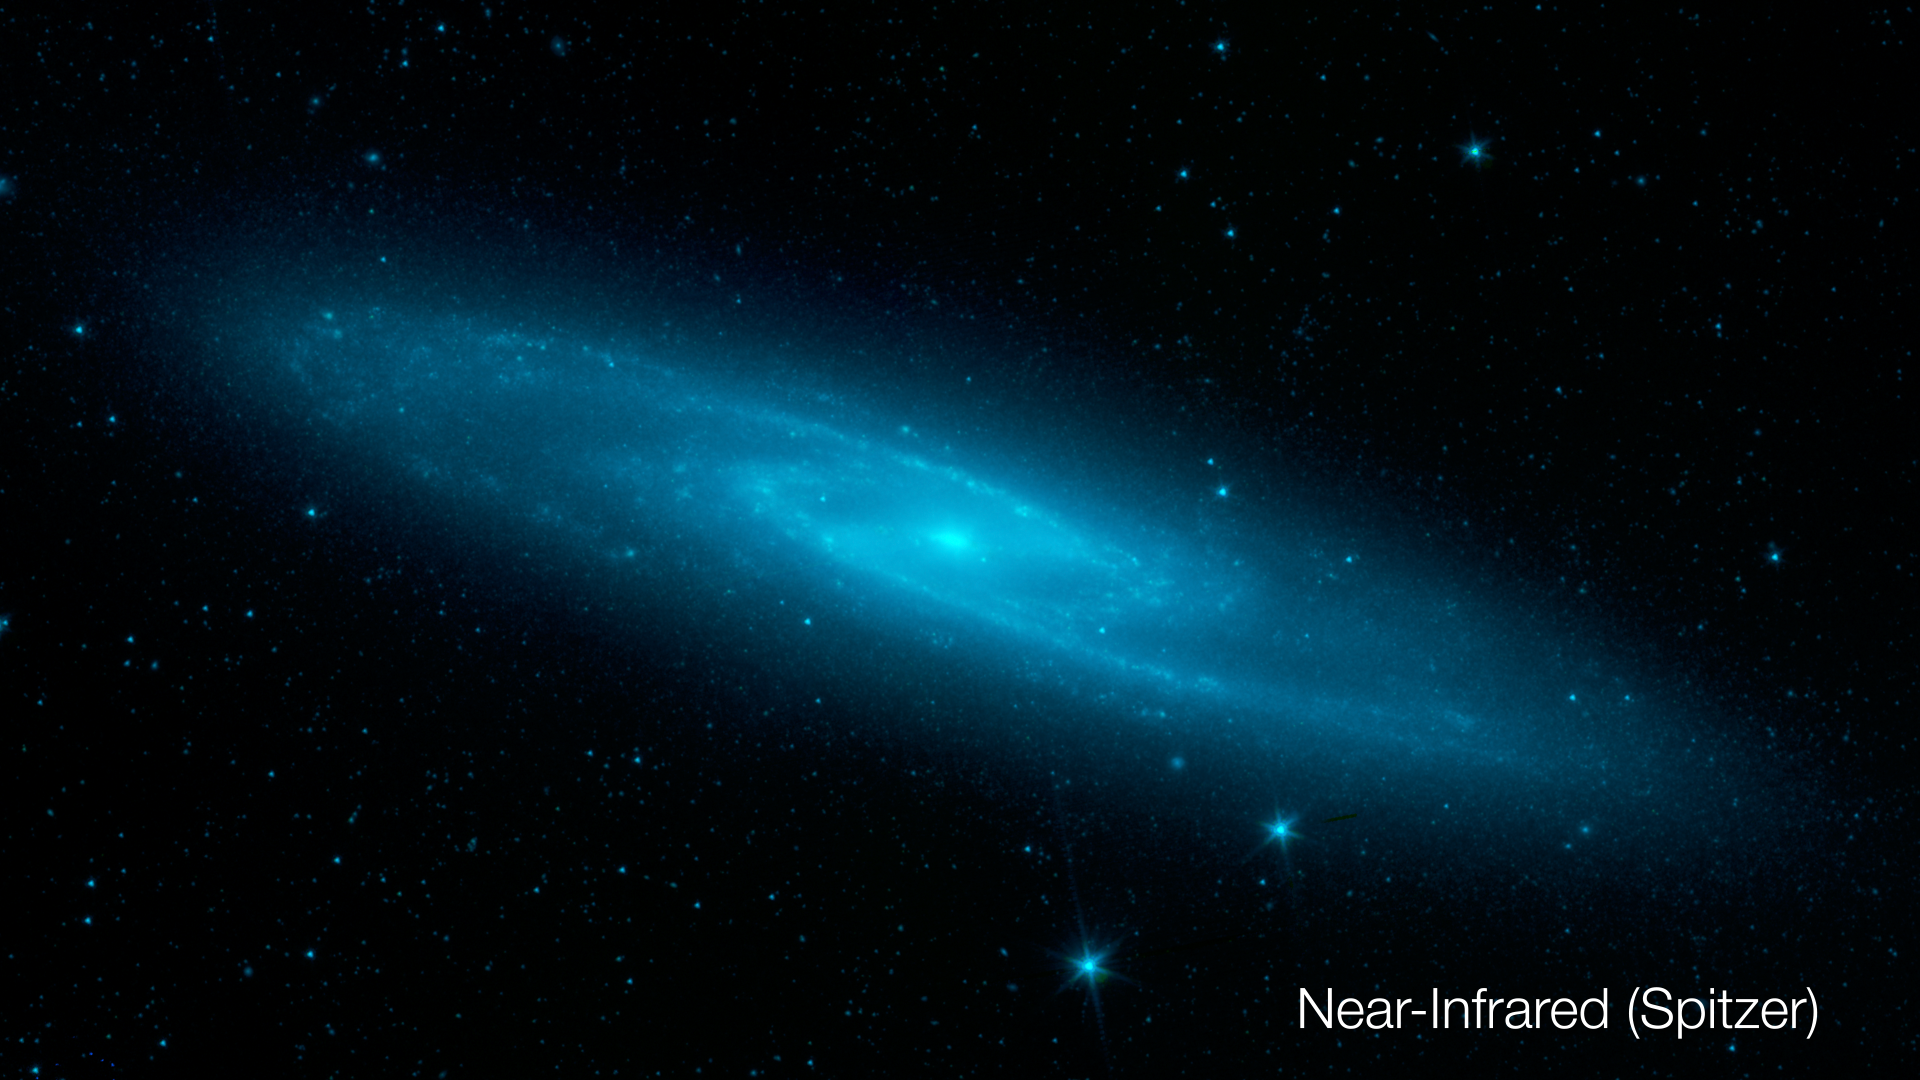 Preview Image for Barred Galaxy (NGC 253) in Multiple Wavelengths